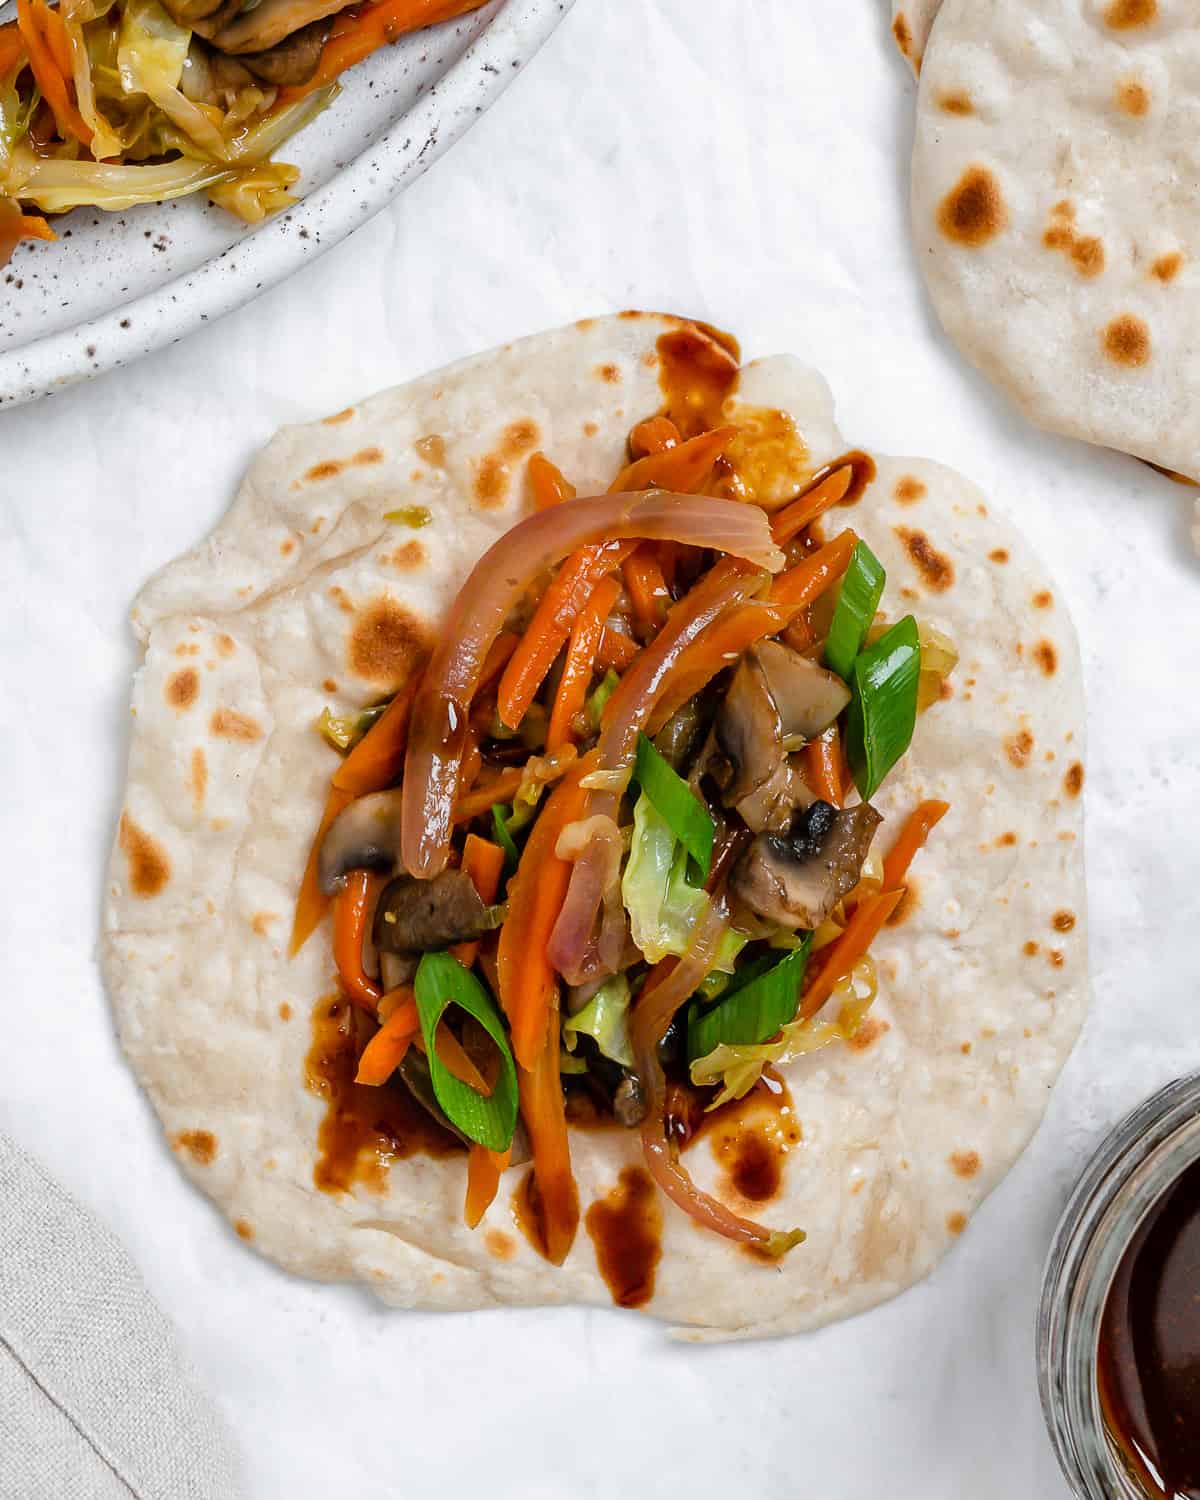 completed Moo Shu Vegetables on mandarin pancakes against a white surface